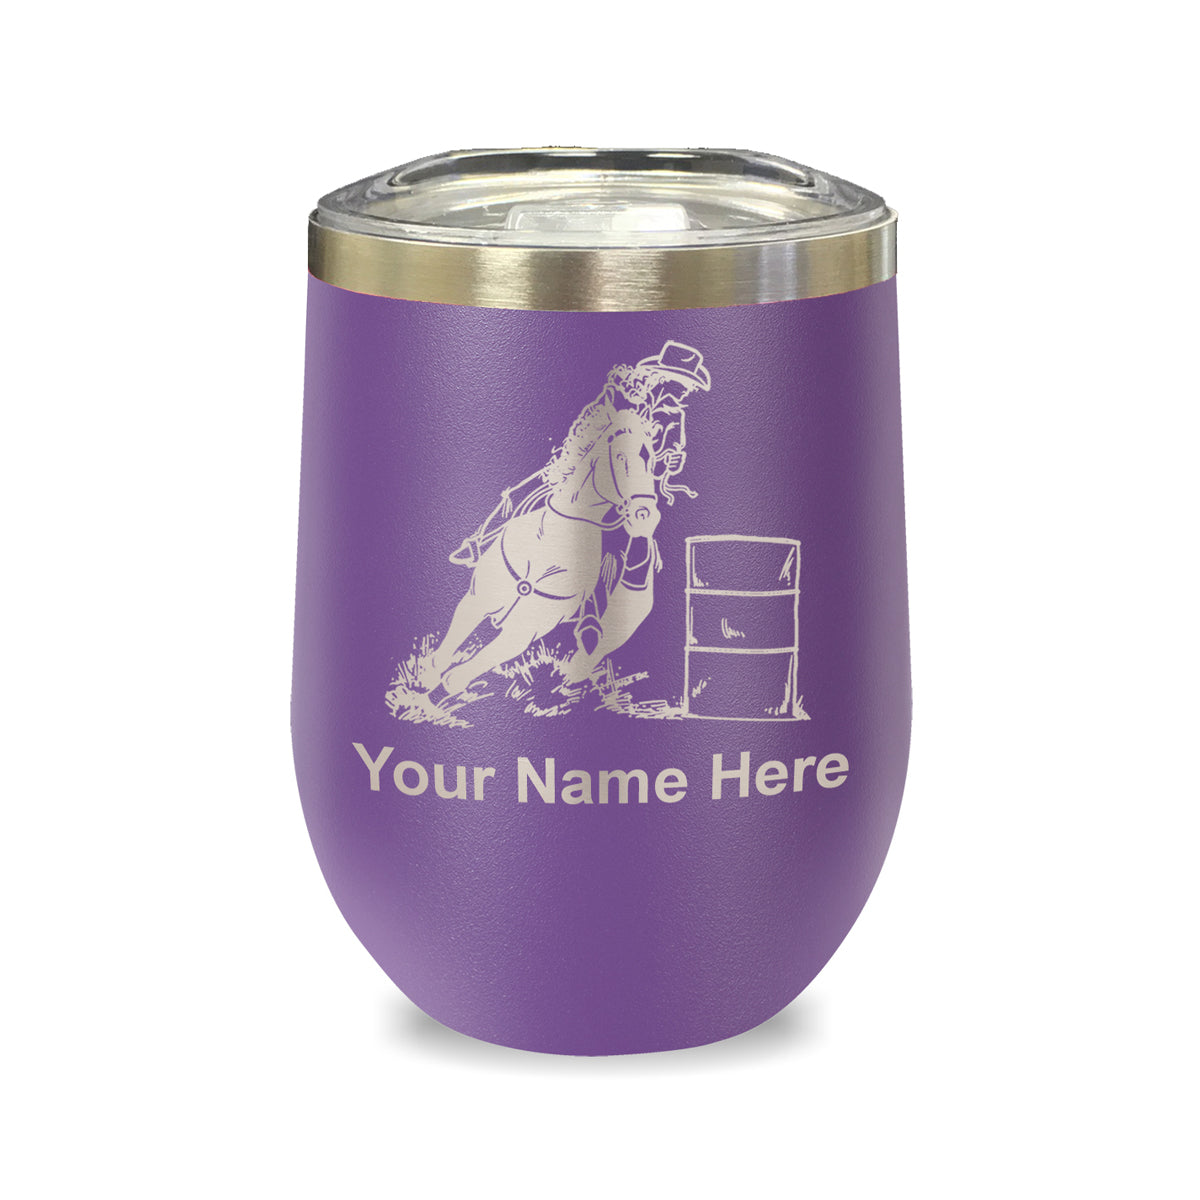 LaserGram Double Wall Stainless Steel Wine Glass, Barrel Racer, Personalized Engraving Included